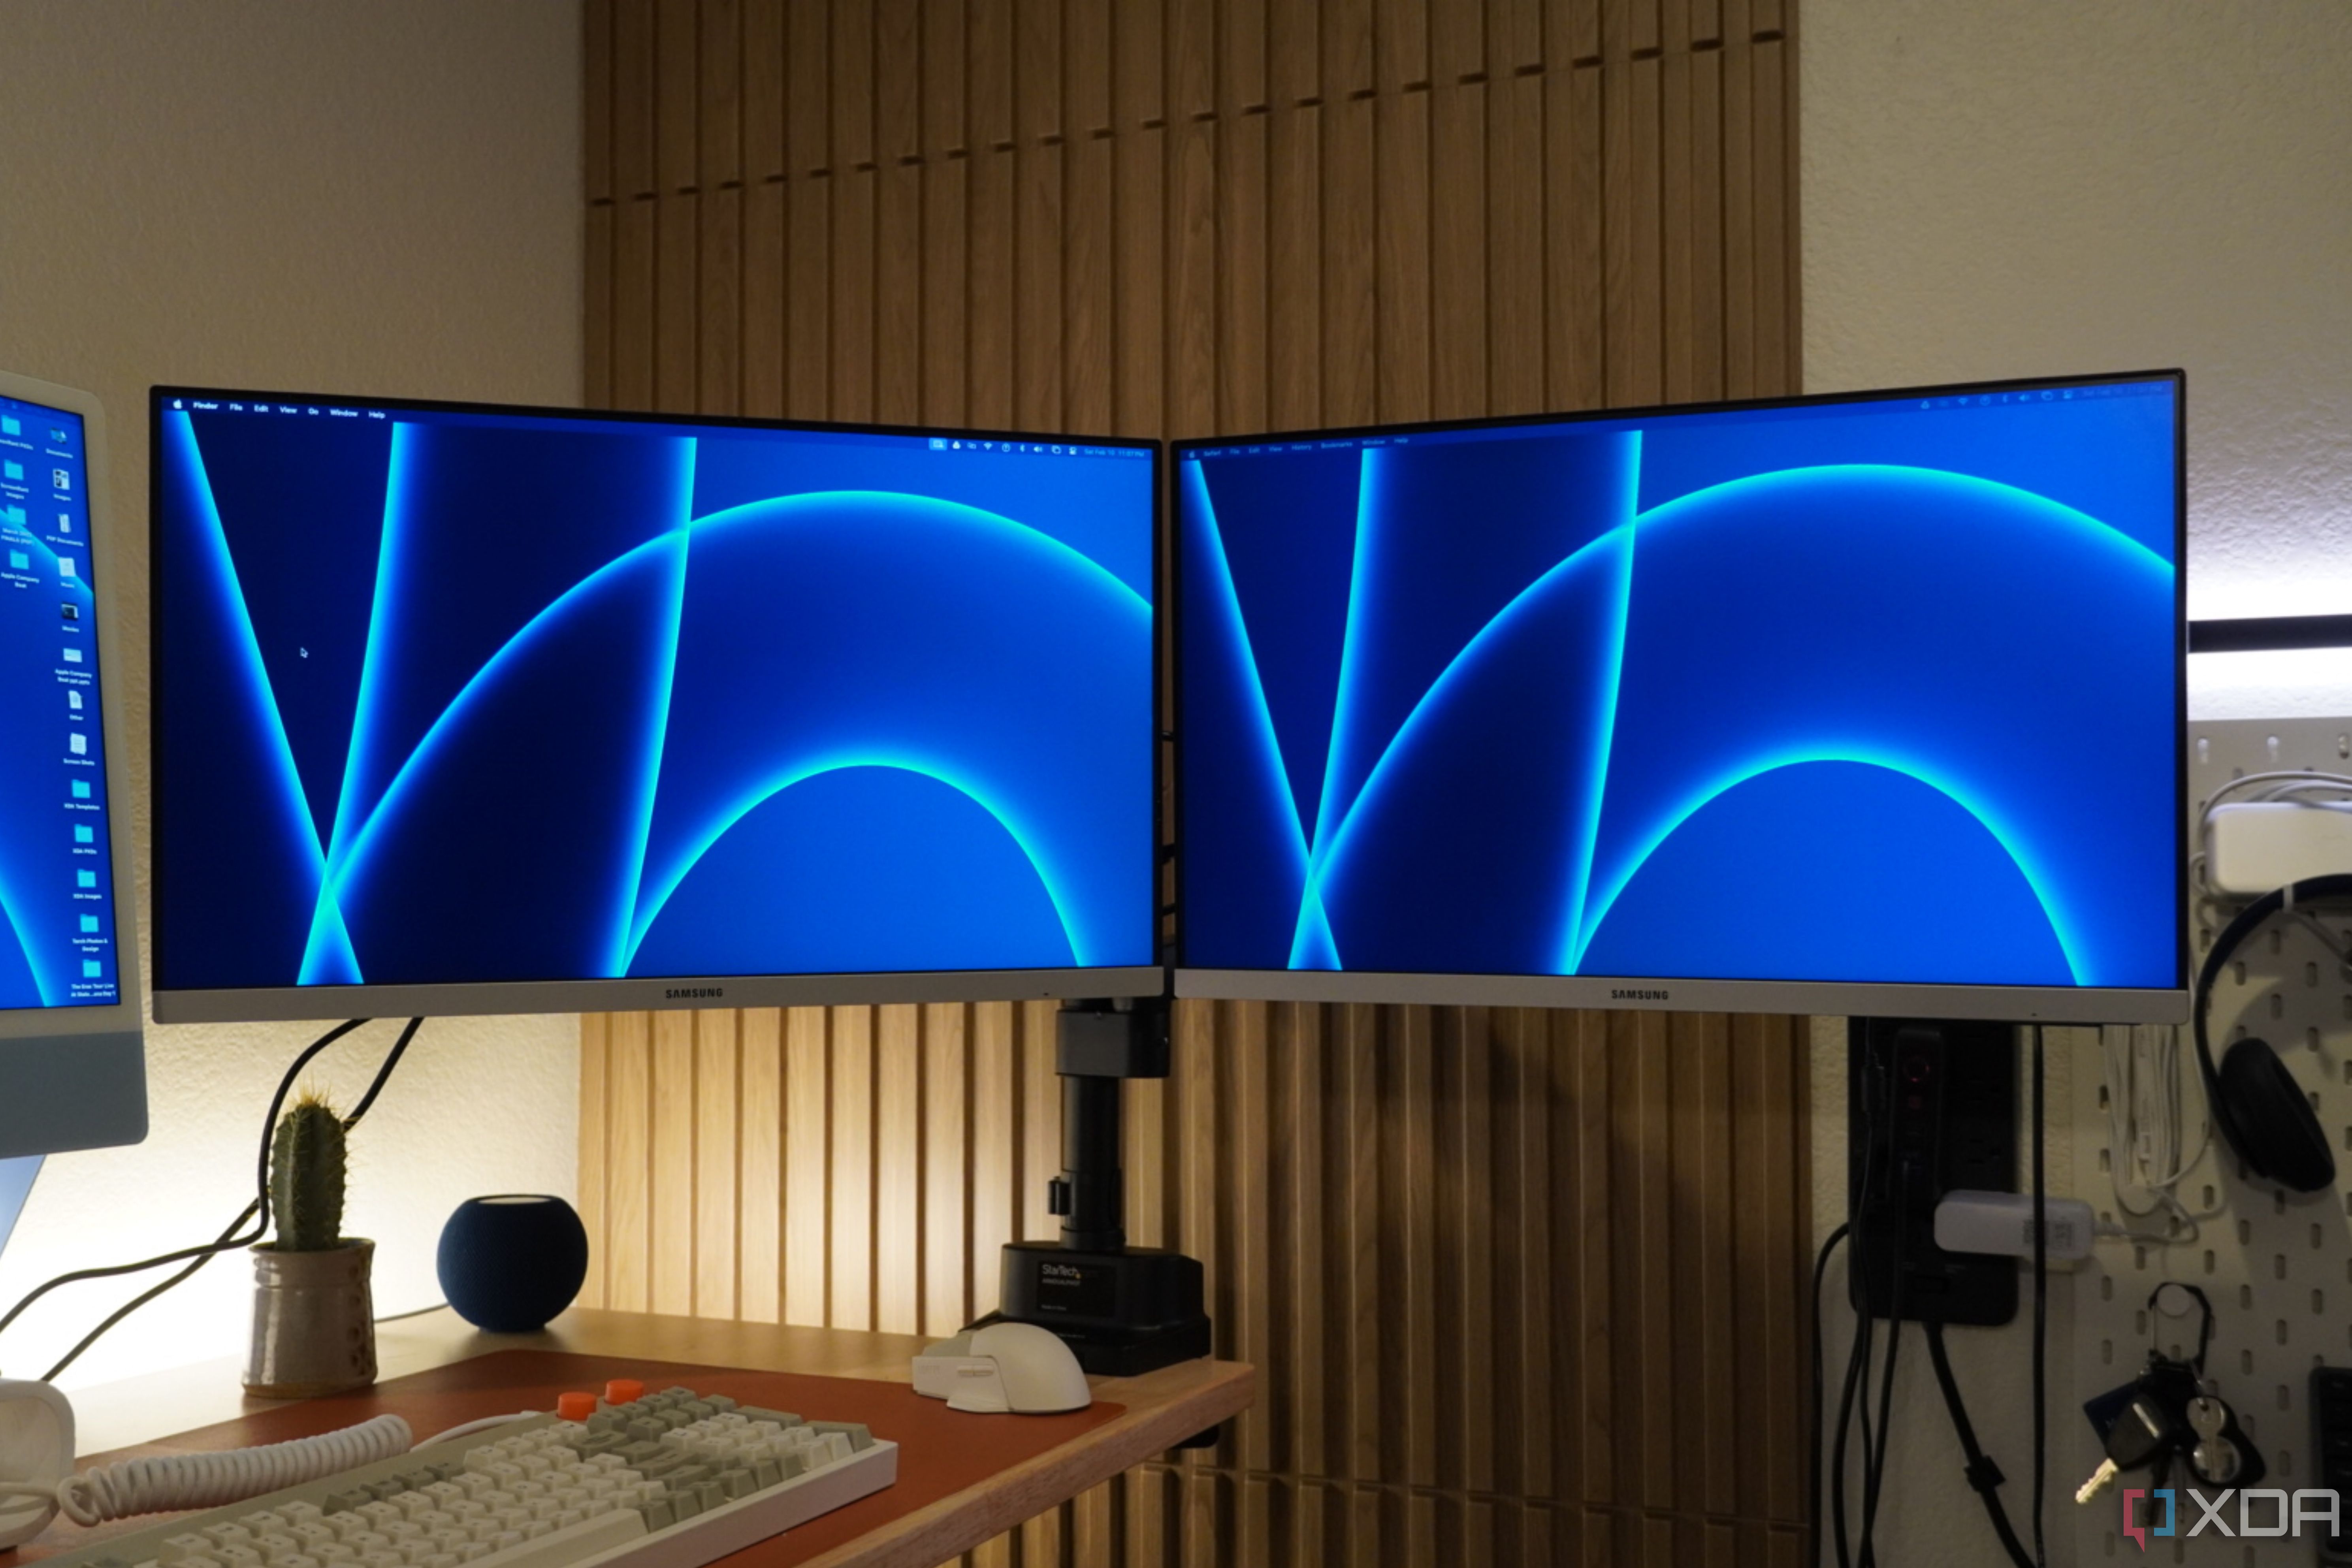 Two Samsung monitors connected to the StarTech dual monitor arm.